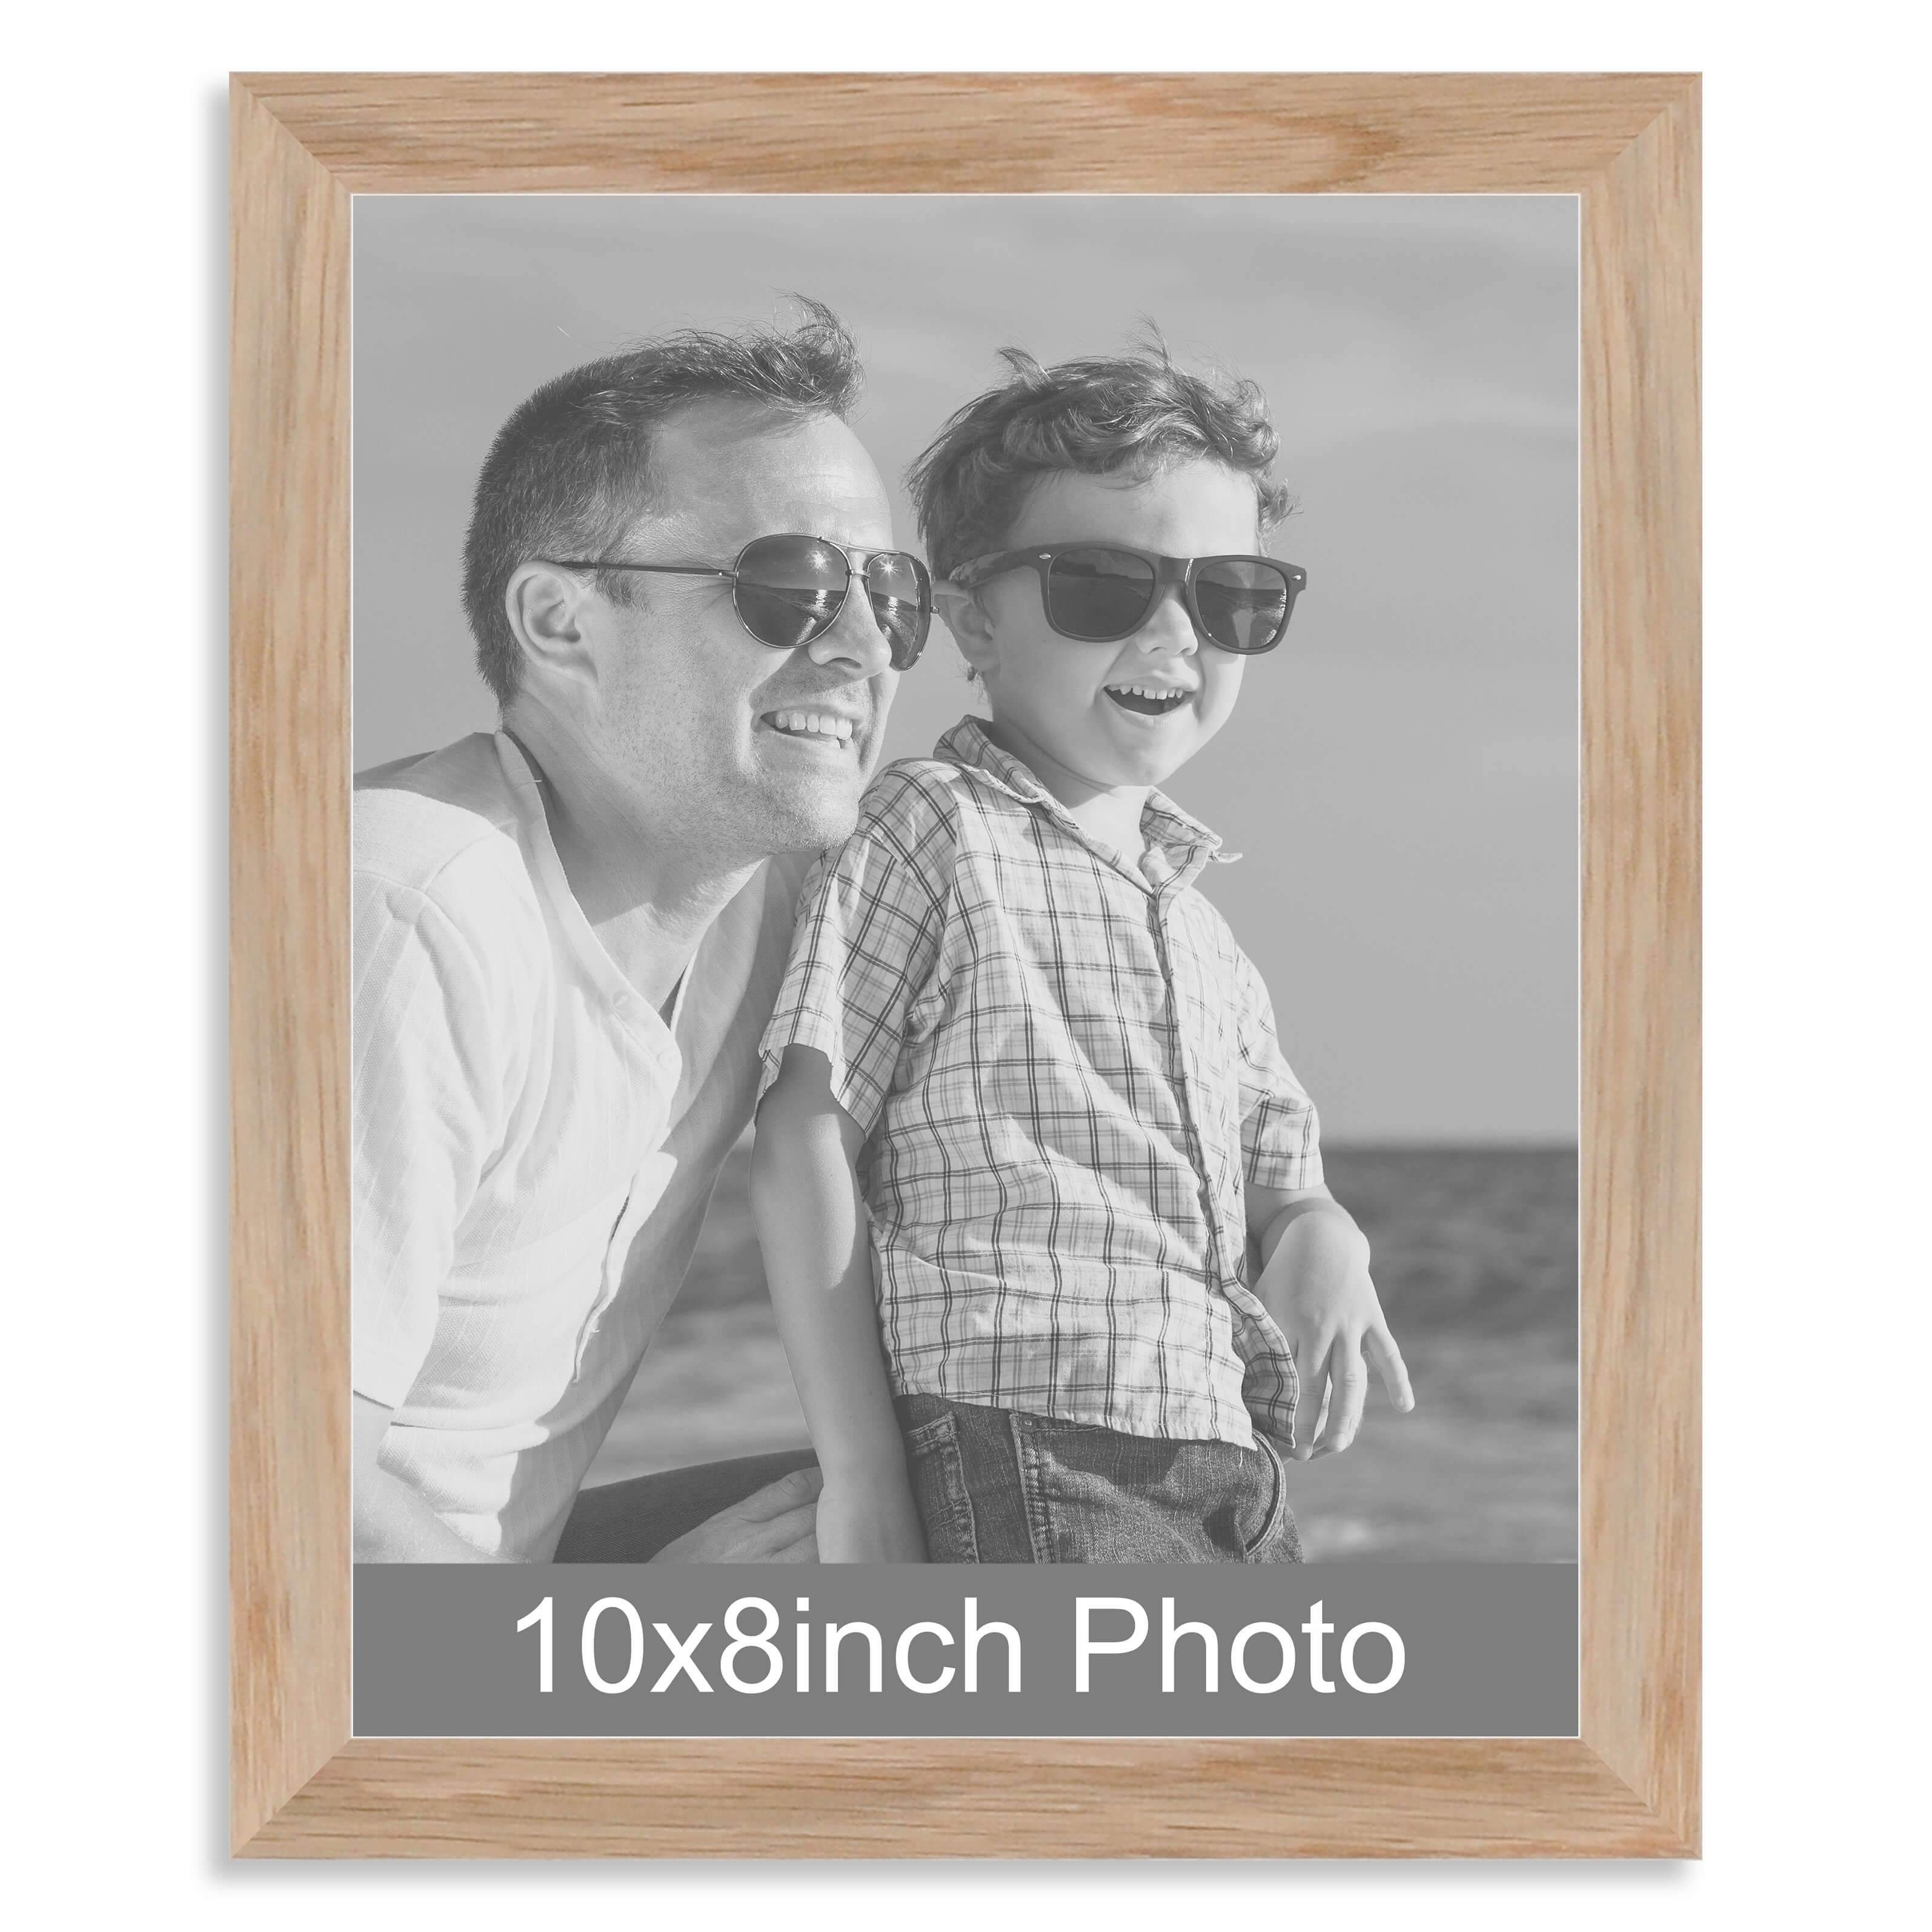 10 x 8inch Solid Oak Photo Frame for a 10×8/8x10in image – Photo to follow on email